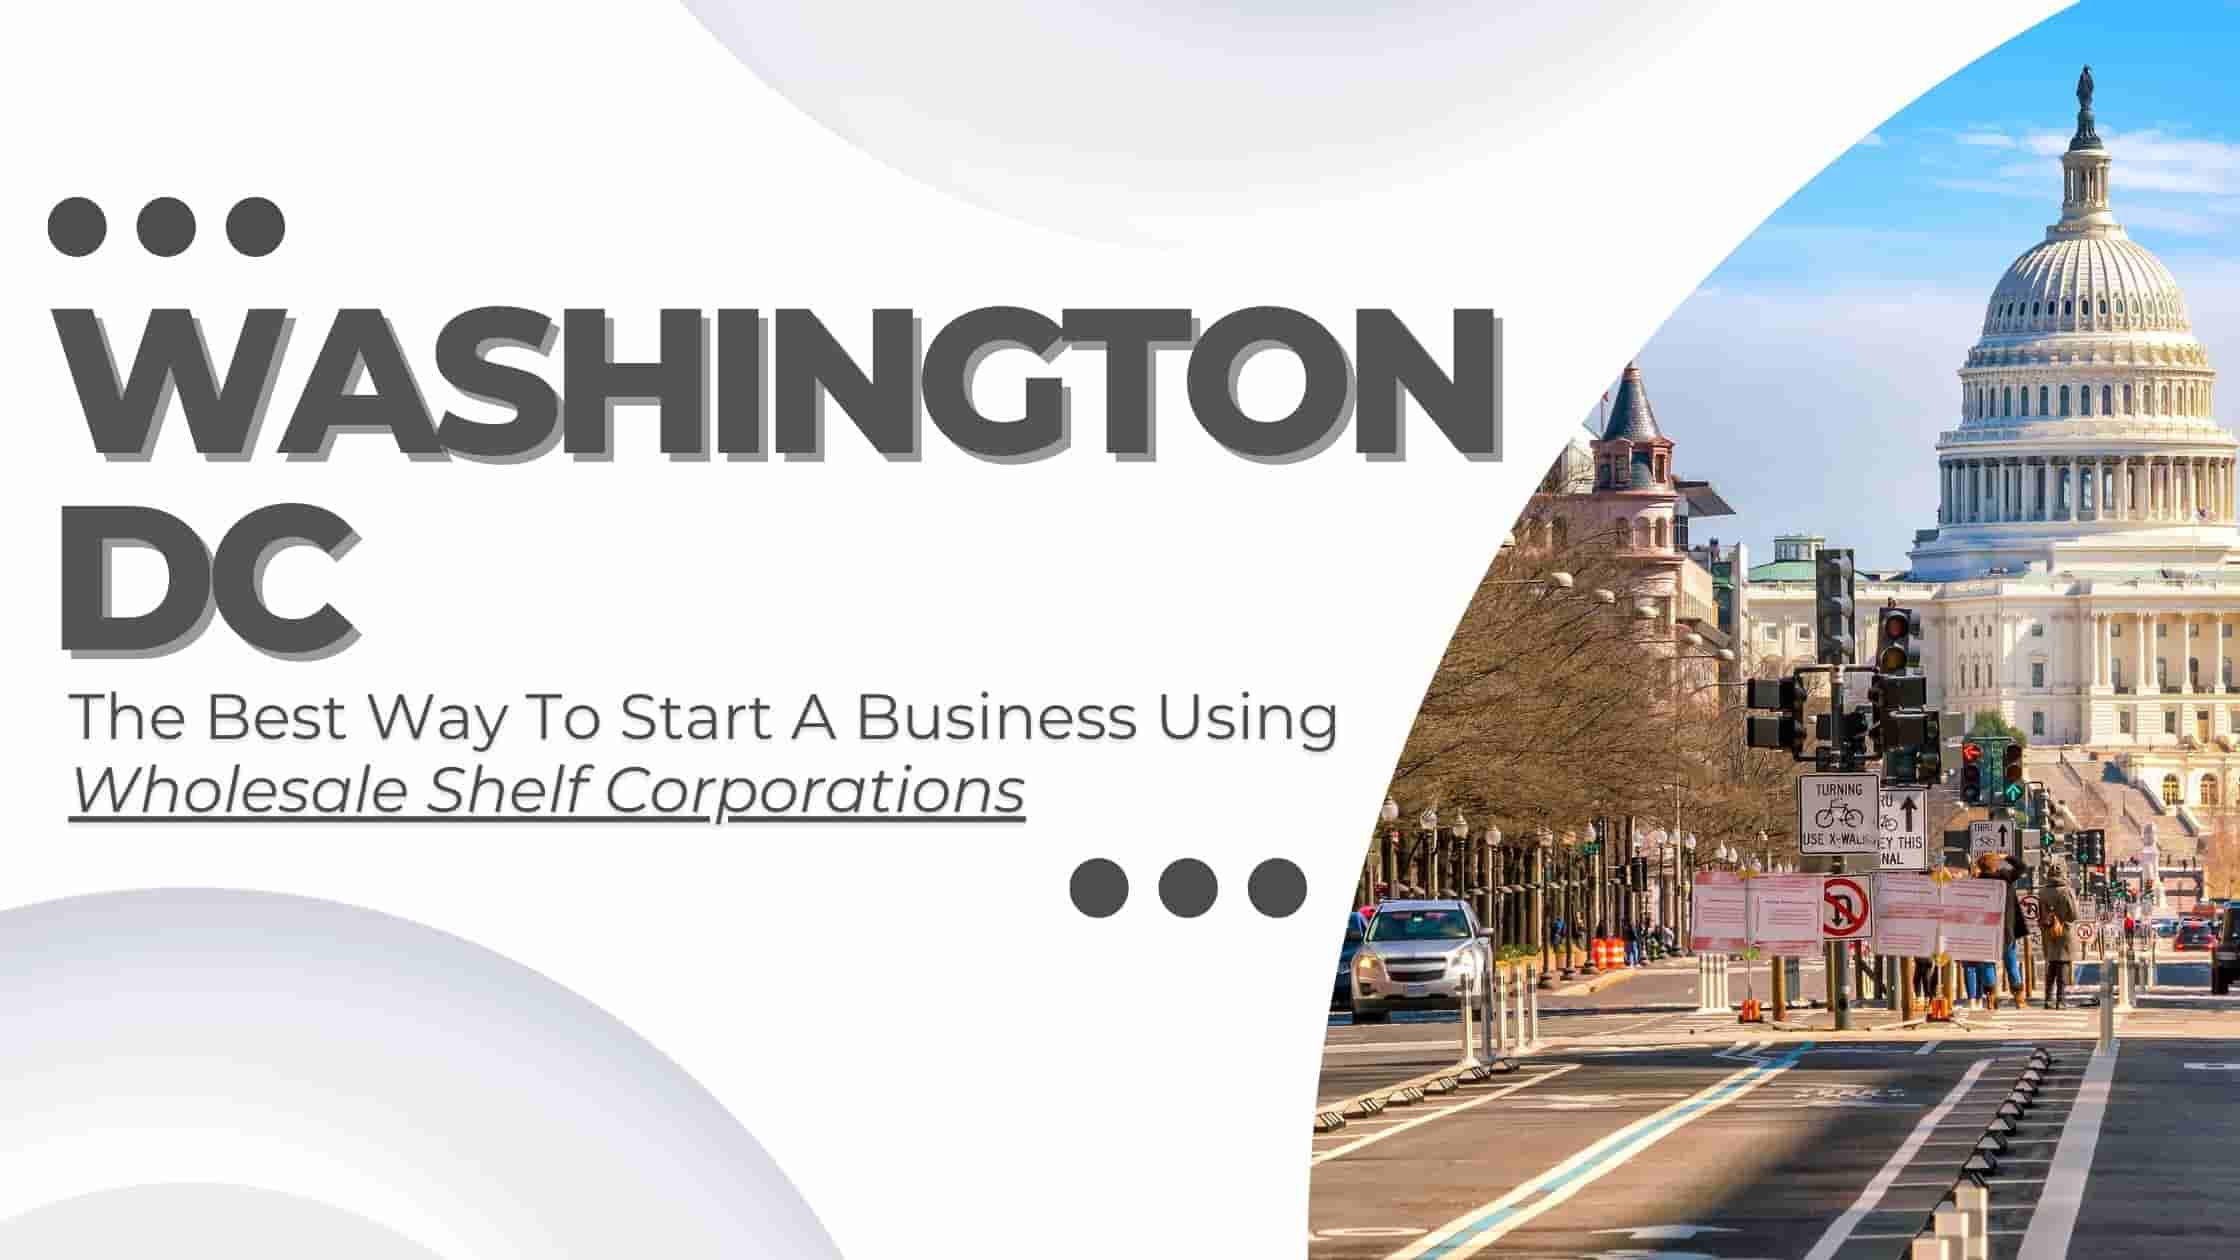 Why wholesale shelf corporations are the best way to start a business in Washington DC?